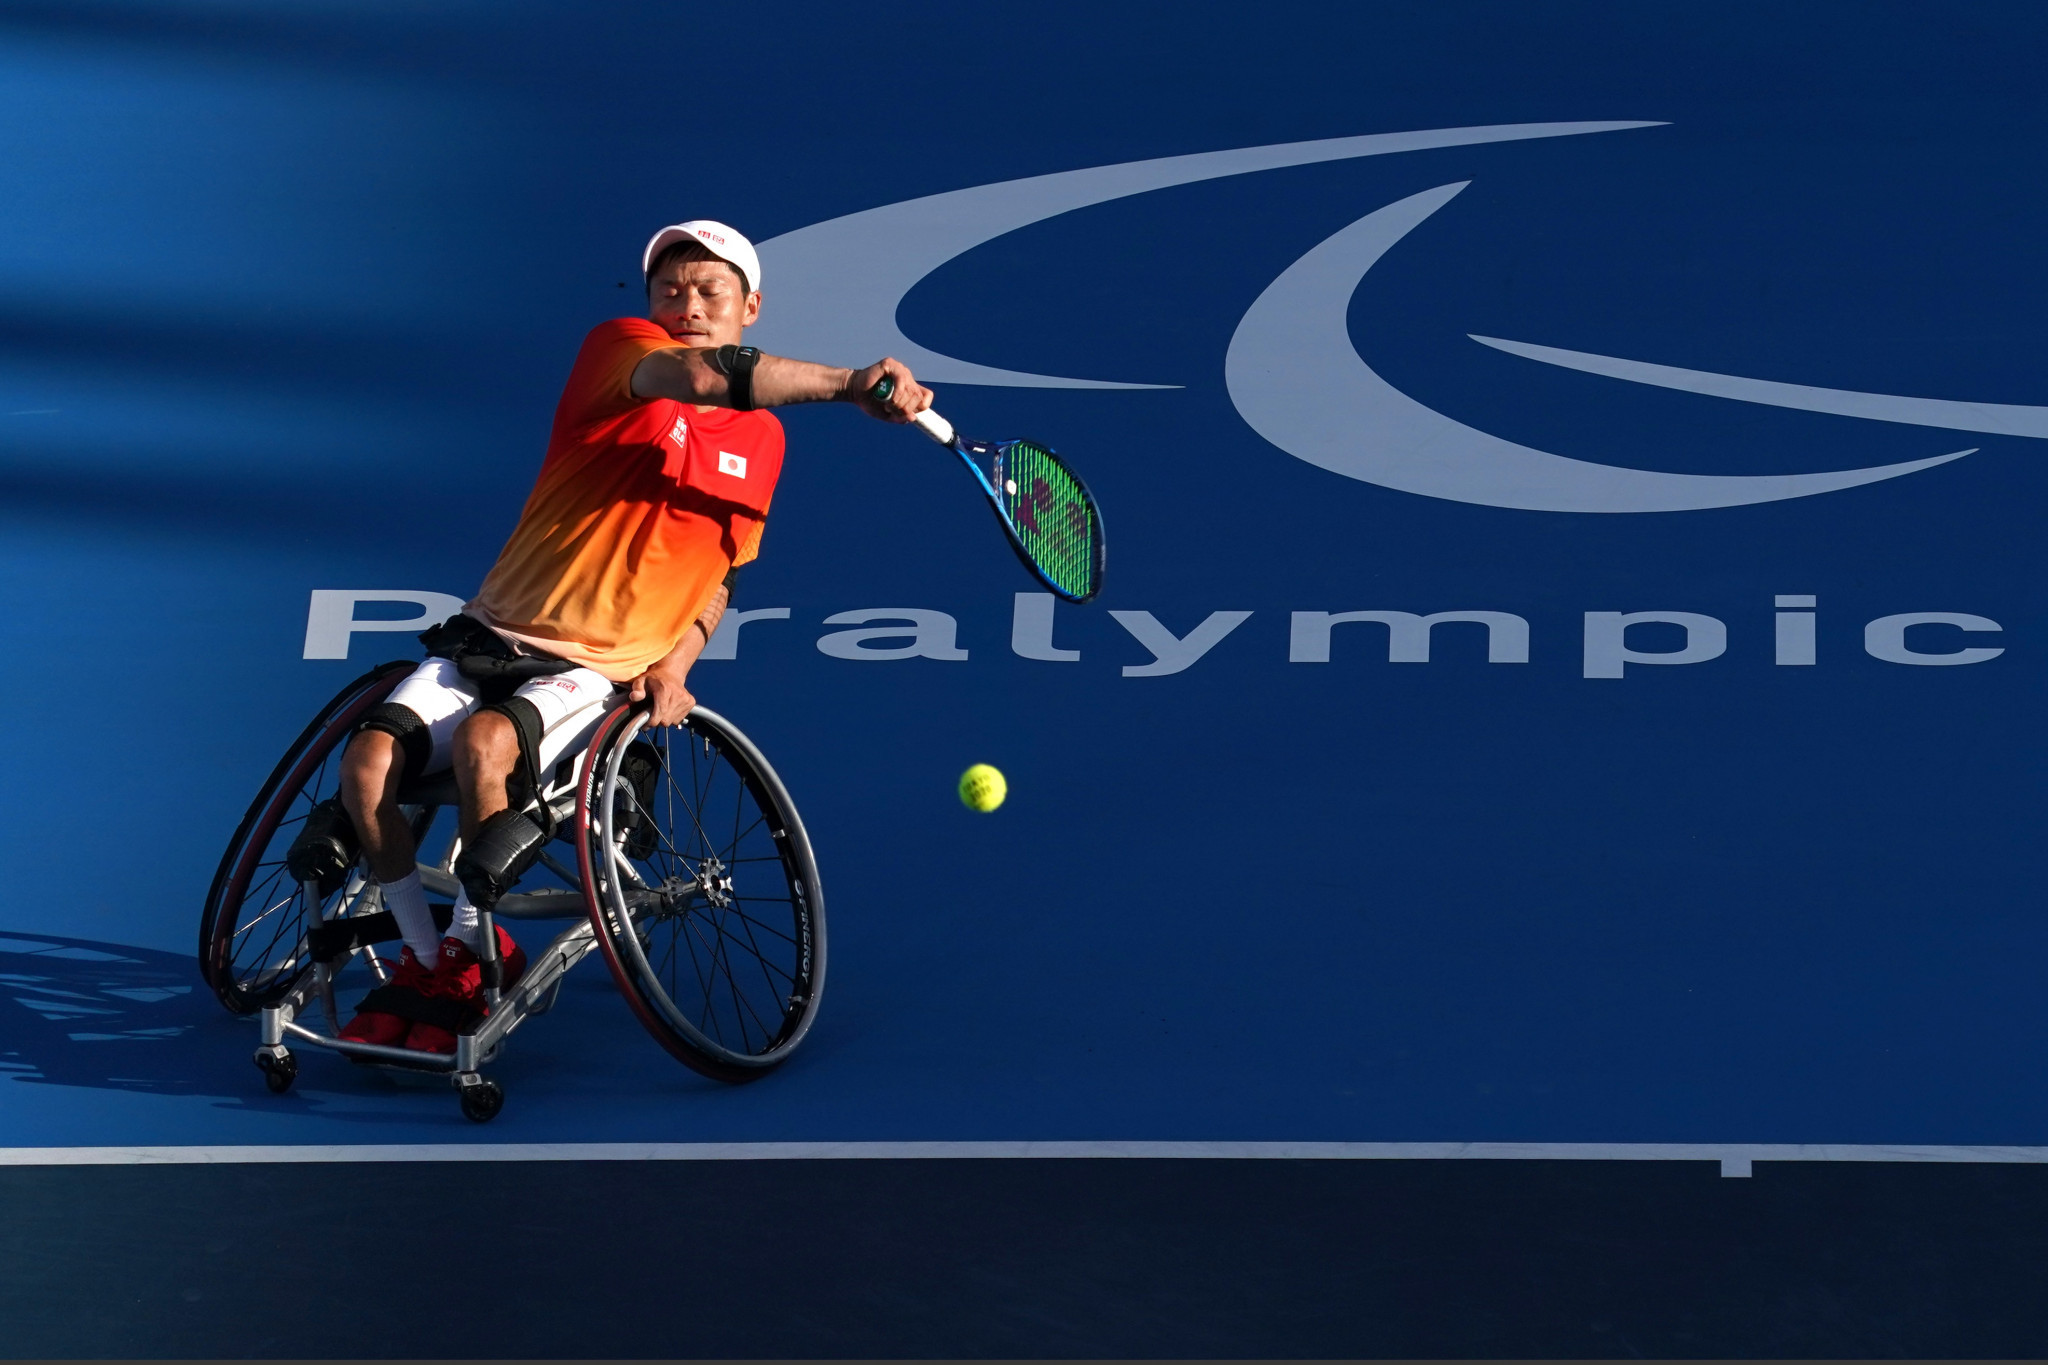 Japanese wheelchair tennis star Shingo Kunieda is gearing up to compete at the Tokyo 2020 Paralympics ©Getty Images